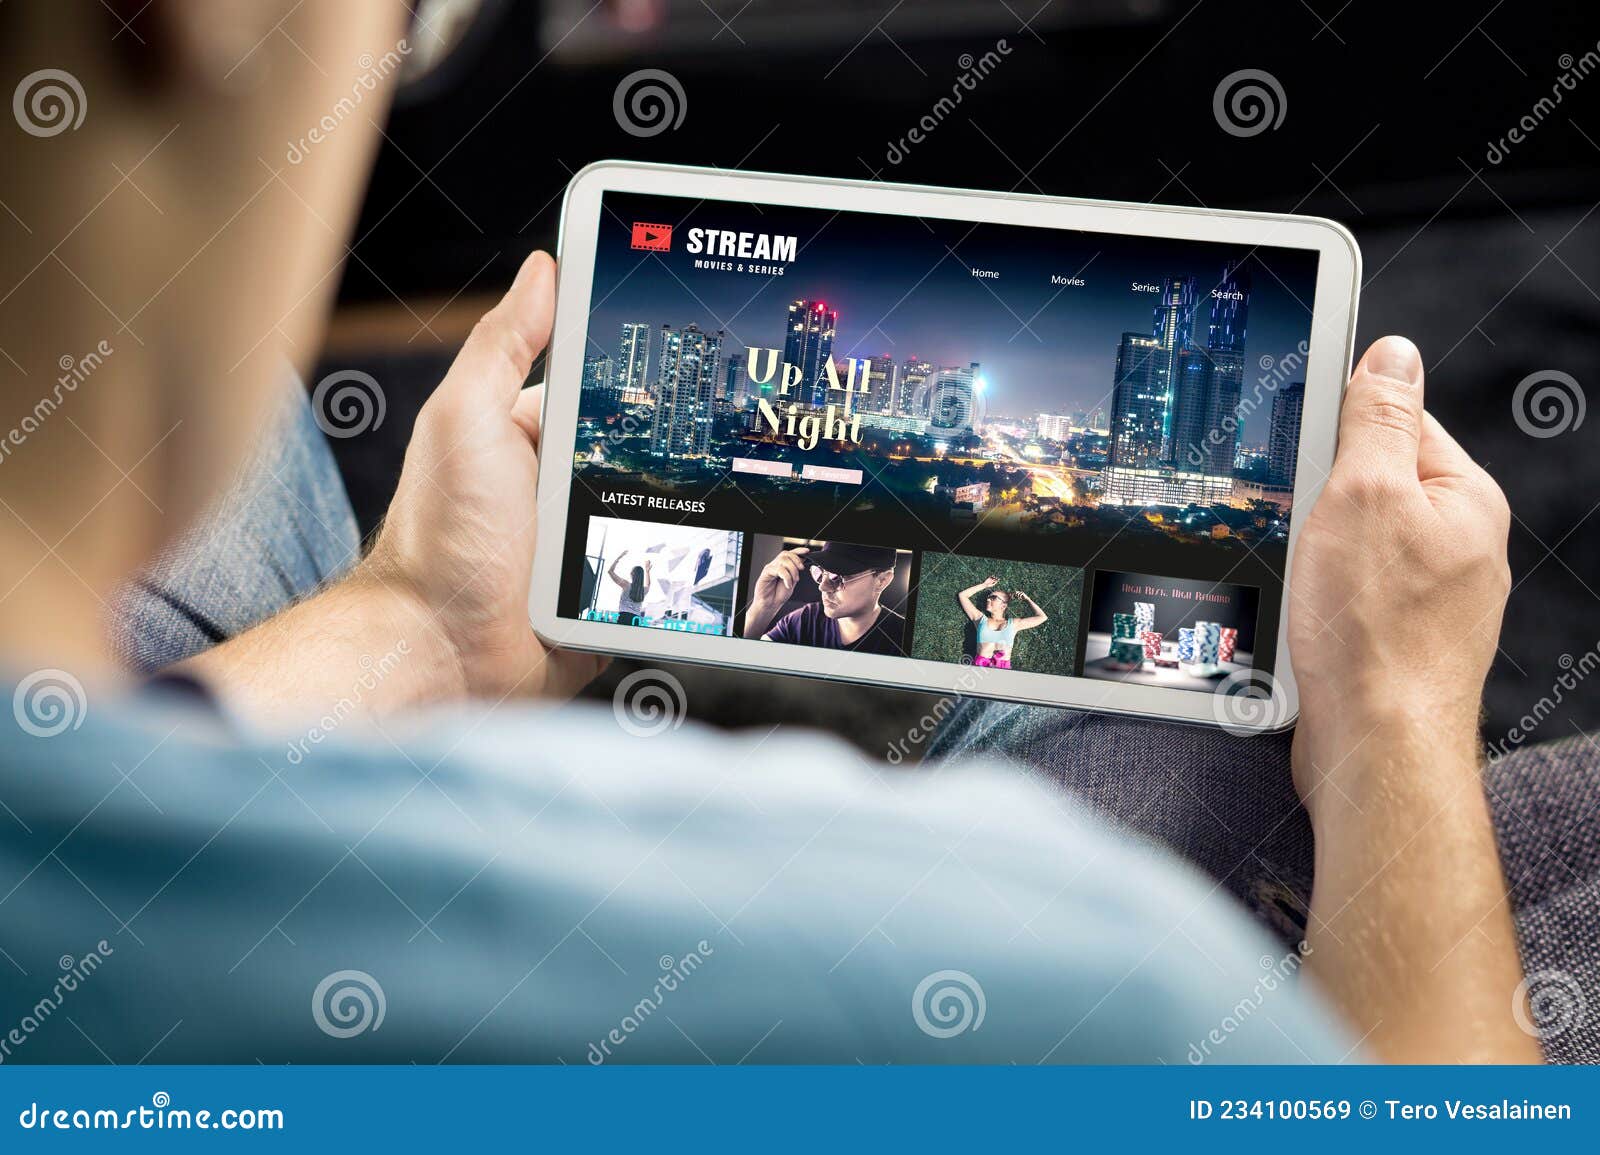 Movie and Series Stream VOD Service in Tablet. Watching on Demand Tv Show or Film Online